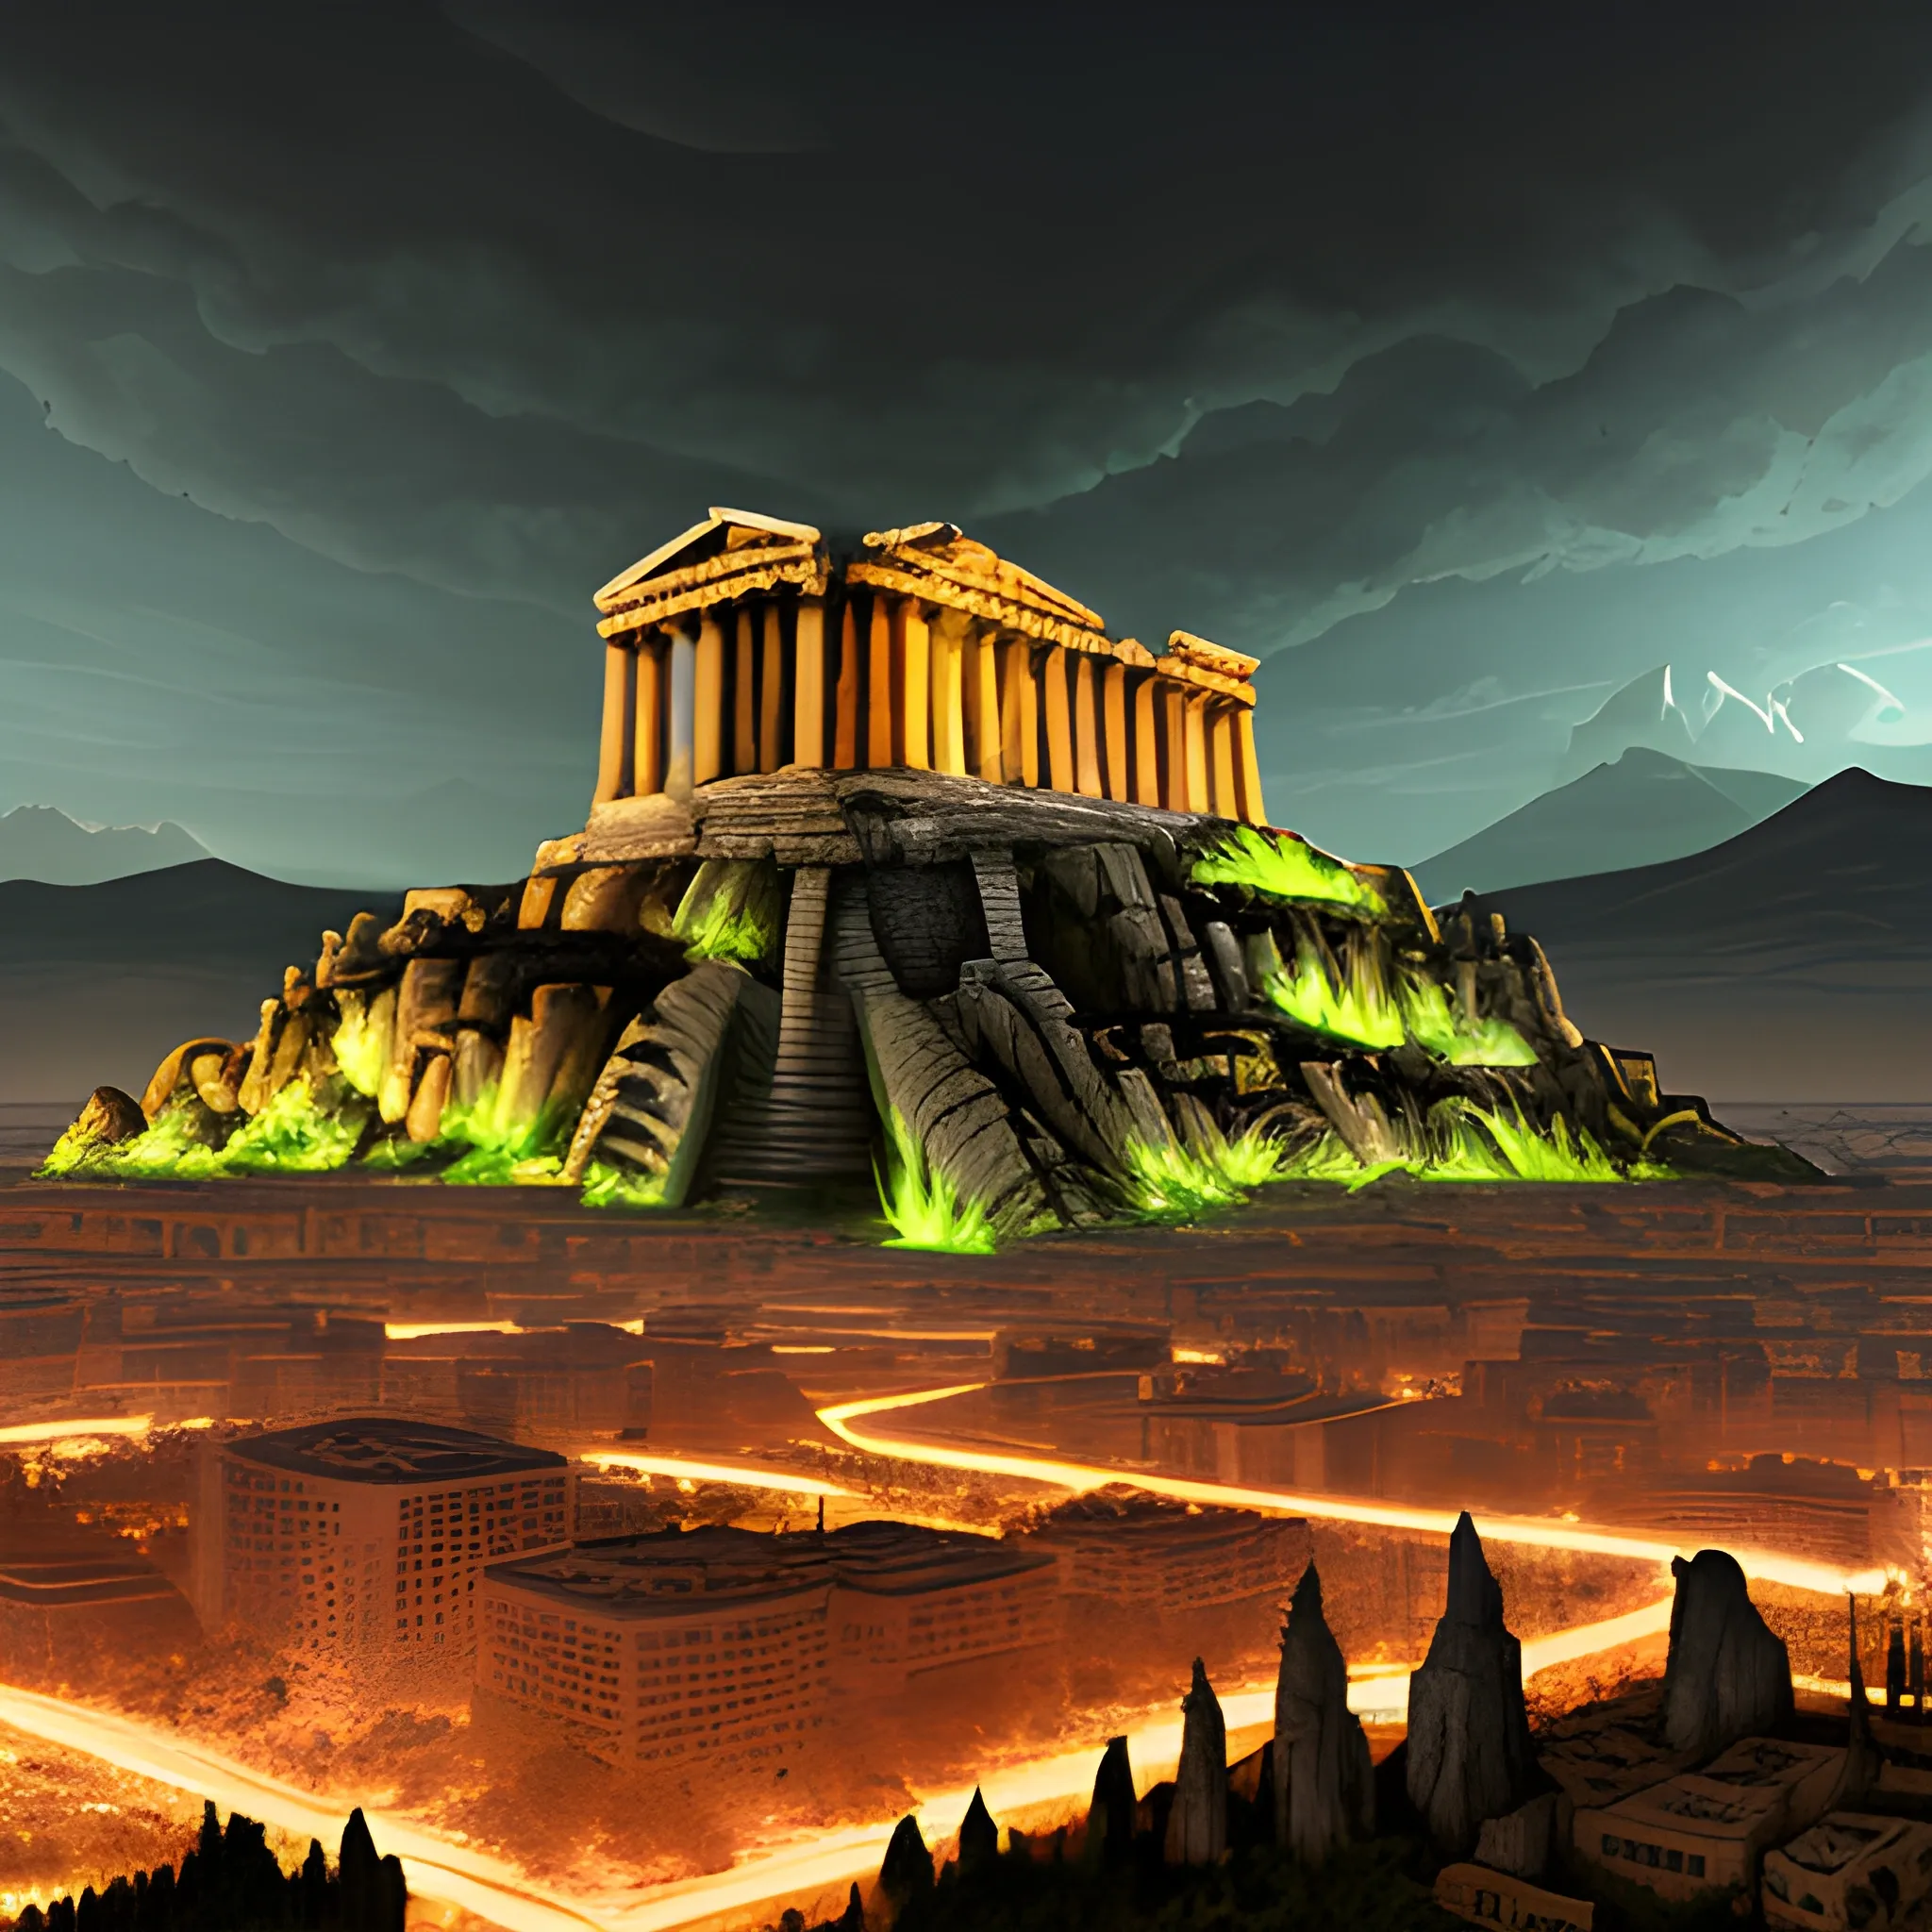 city of acropolis, on a high mountain, destroyed city, surrounded by clouds, dark environment, place of terror, dim lights, destruction, rot, night, darkness, dead vegetation, moor, rotten fauna, dry trees, burned grass, dead grass, barren plants, burned trees, small creatures, 4 legs, stare, green eyes, glowing eyes, dark lighting, terror, dark moon, darkness, ruins, destroyed, death, ancient greek architectural details, detailed environment, hyper realistic, city destroyed, decay, rot, 8k details, wide angle, 3d, panoramic view, slasher style